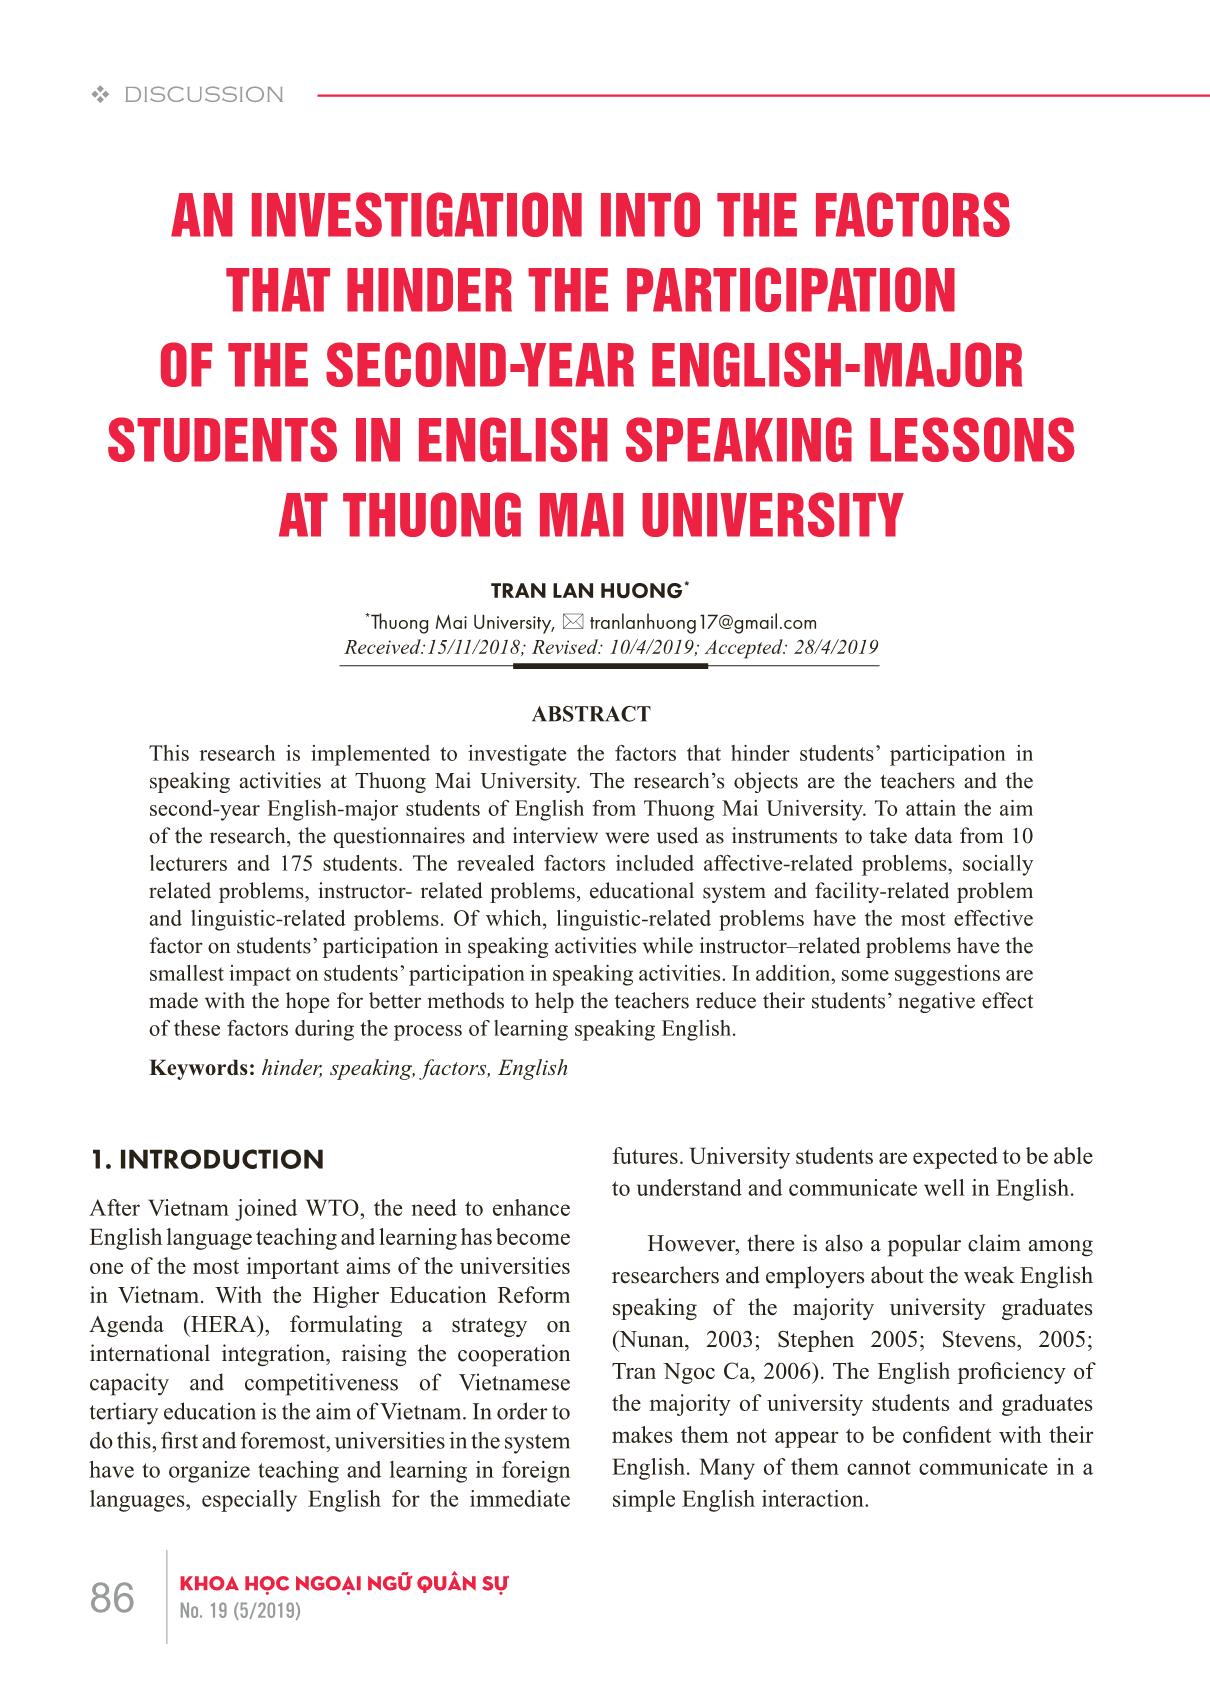 An investigation into the factors that hinder the participation of the second-year English-major students in English speaking lessons at Thuong Mai University trang 1